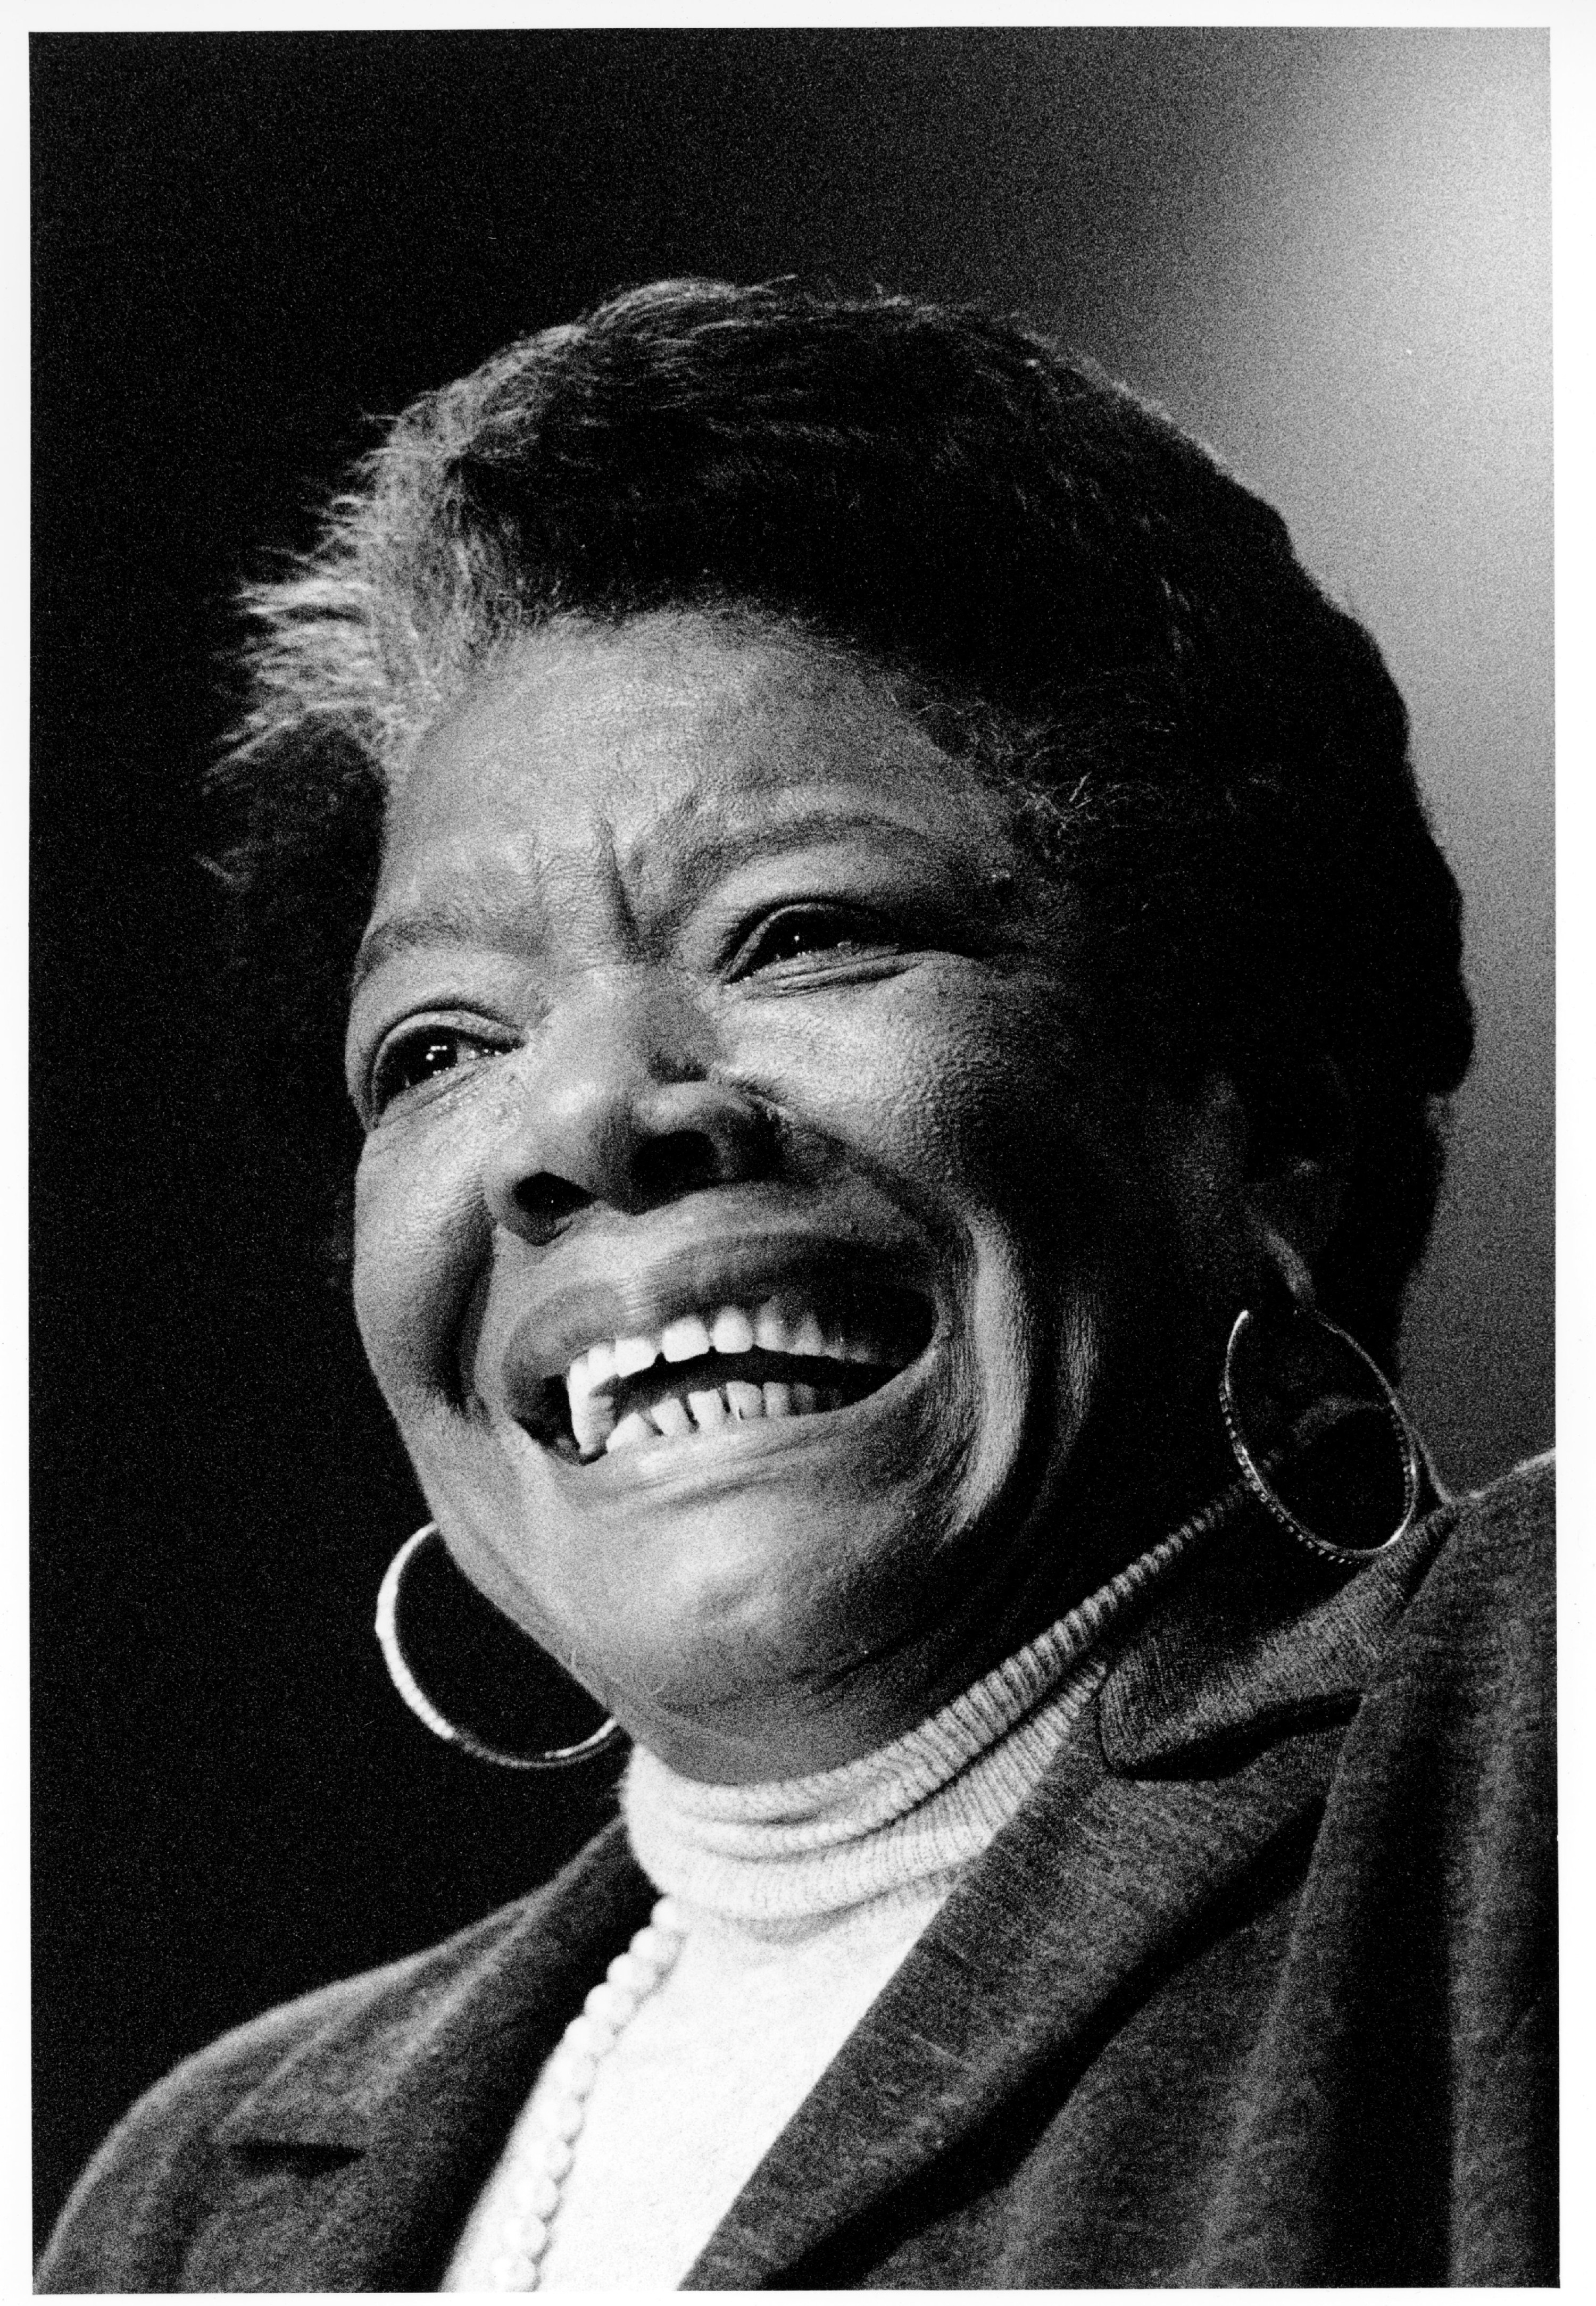 Maya Angelou smiles during a visit to Massachusetts for an event